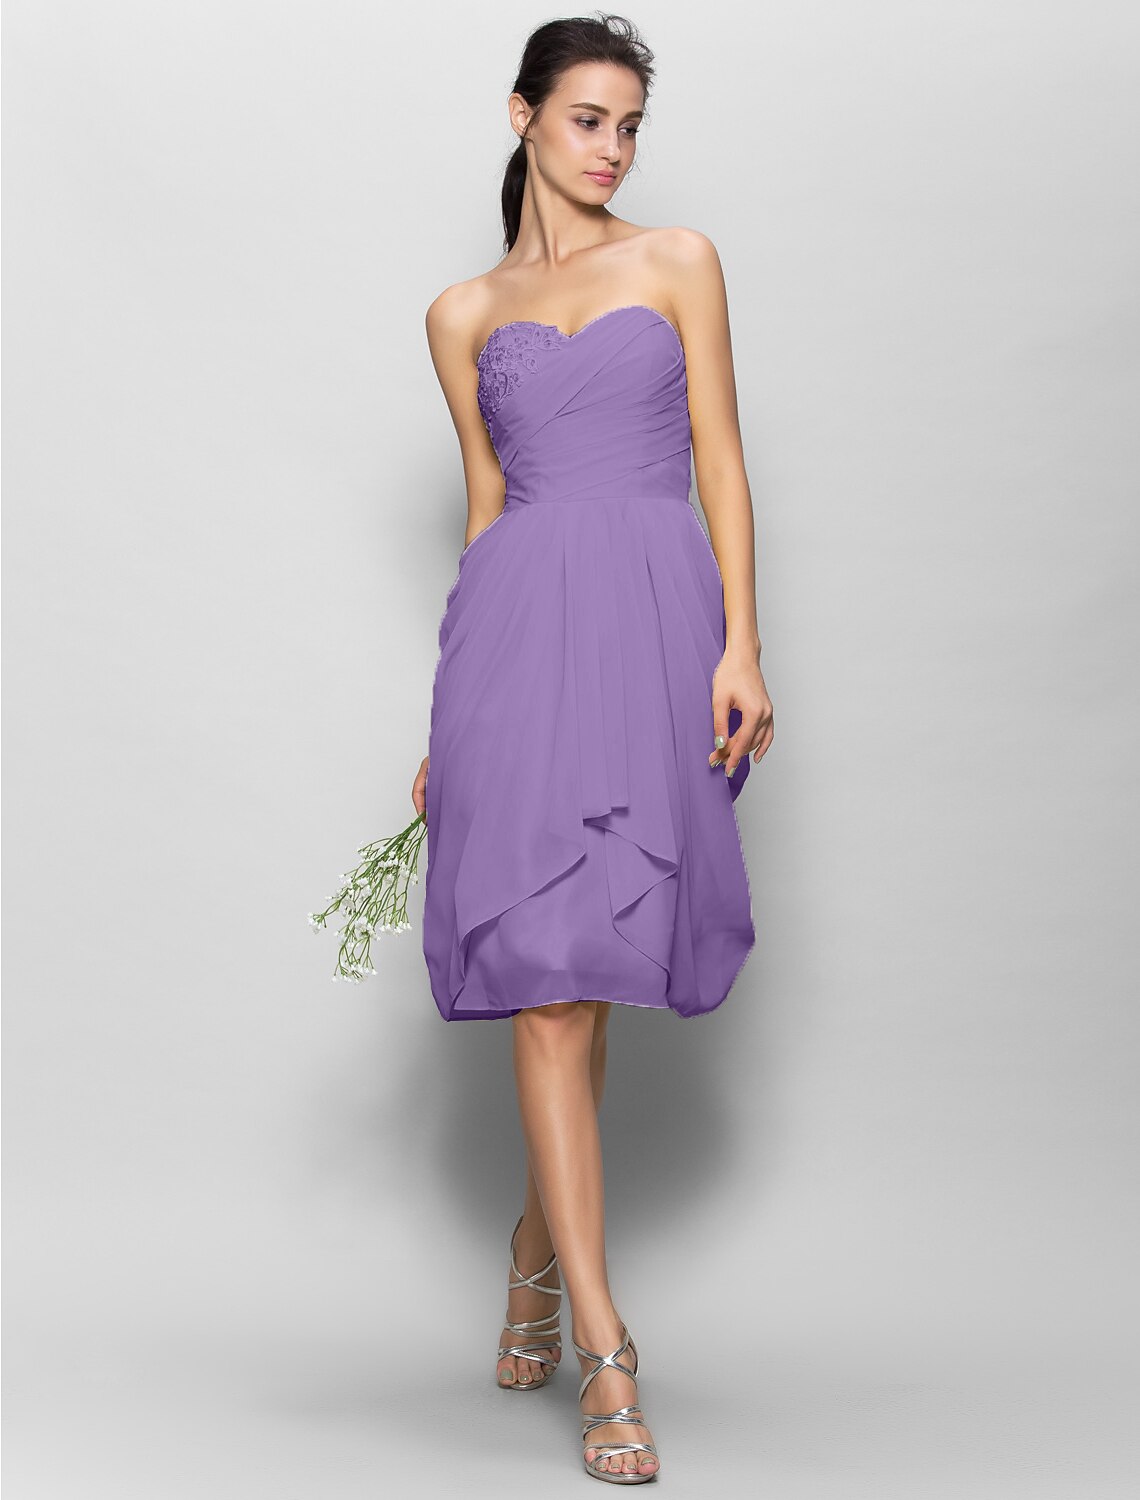 A-Line Sweetheart Neckline Knee Length Chiffon Bridesmaid Dress with Appliques Draping